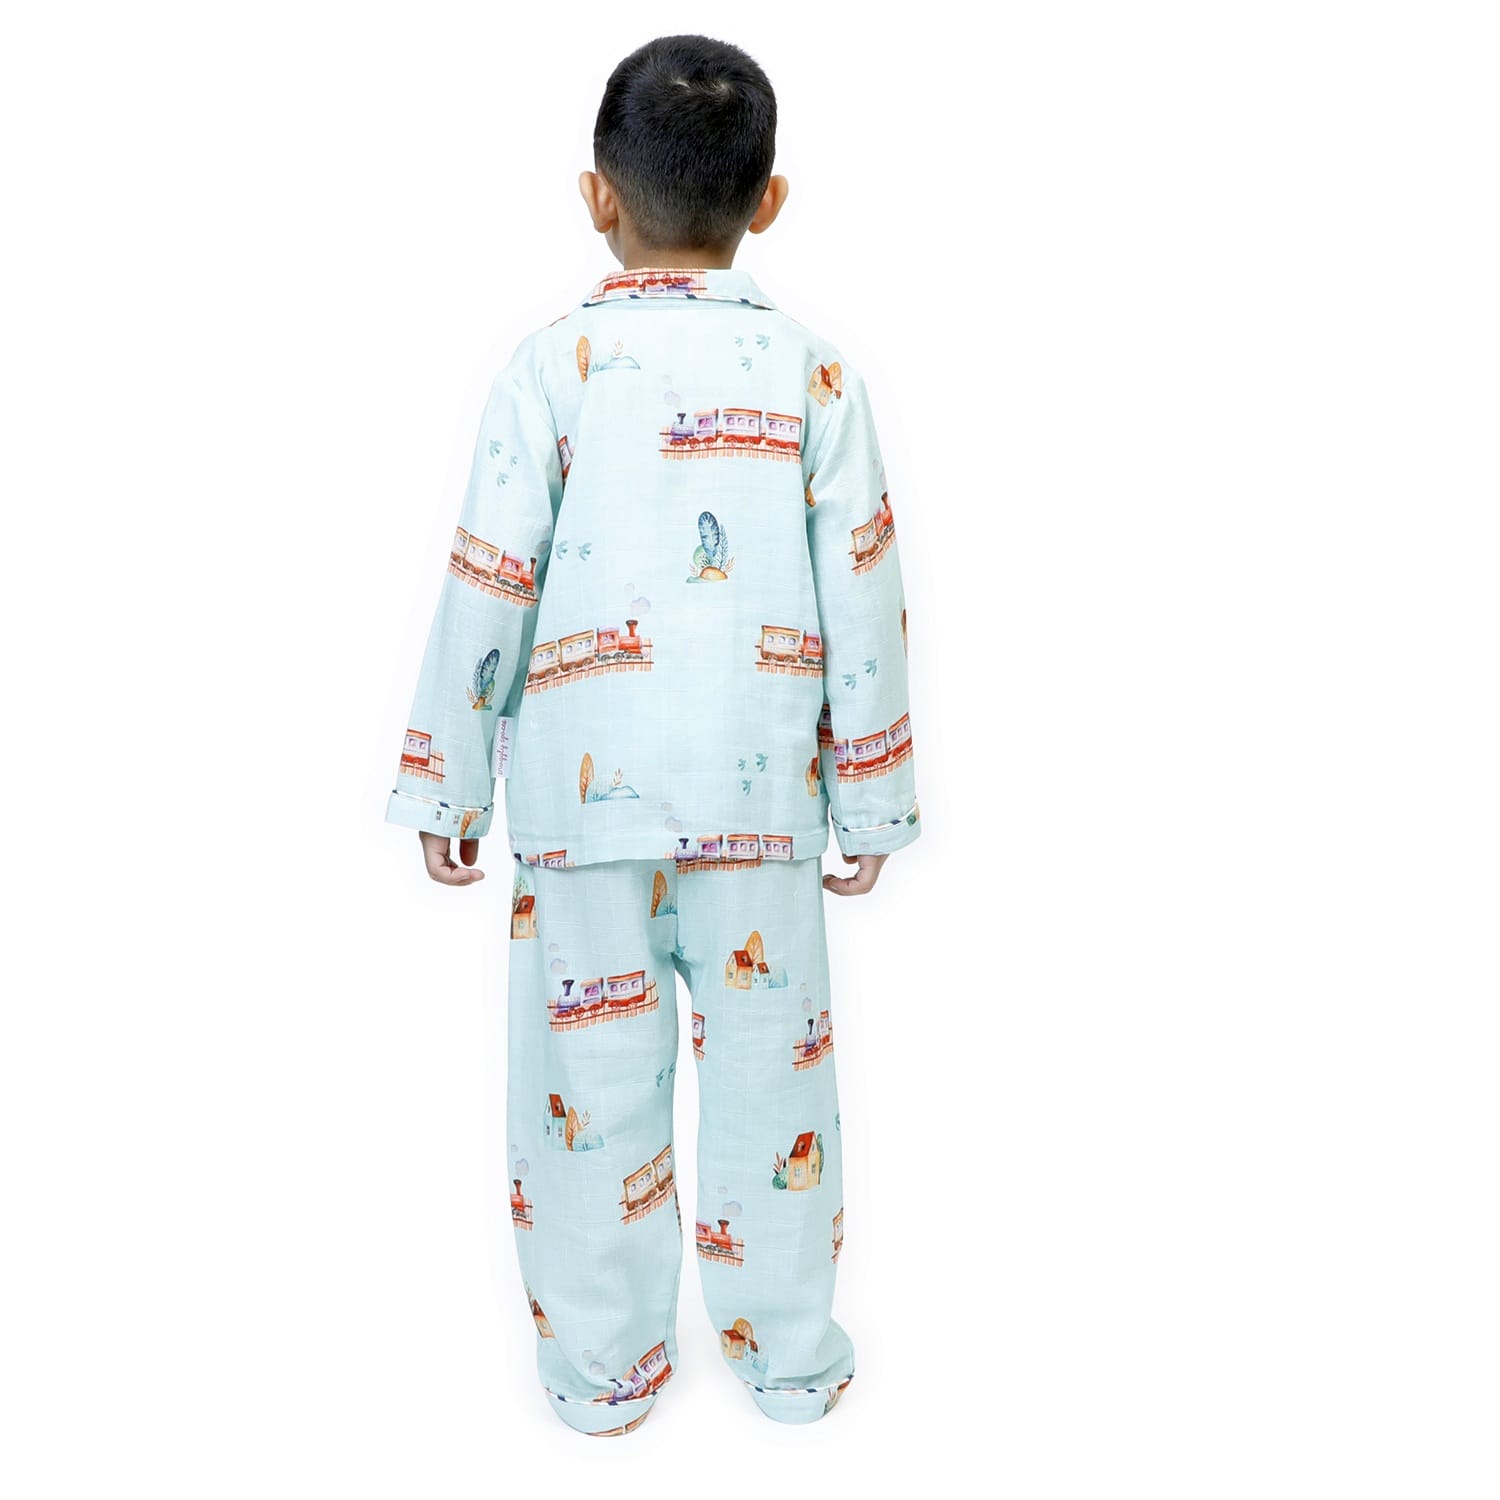 Ollie the Train (Blue) - Bamboo Muslin Night Suit Set